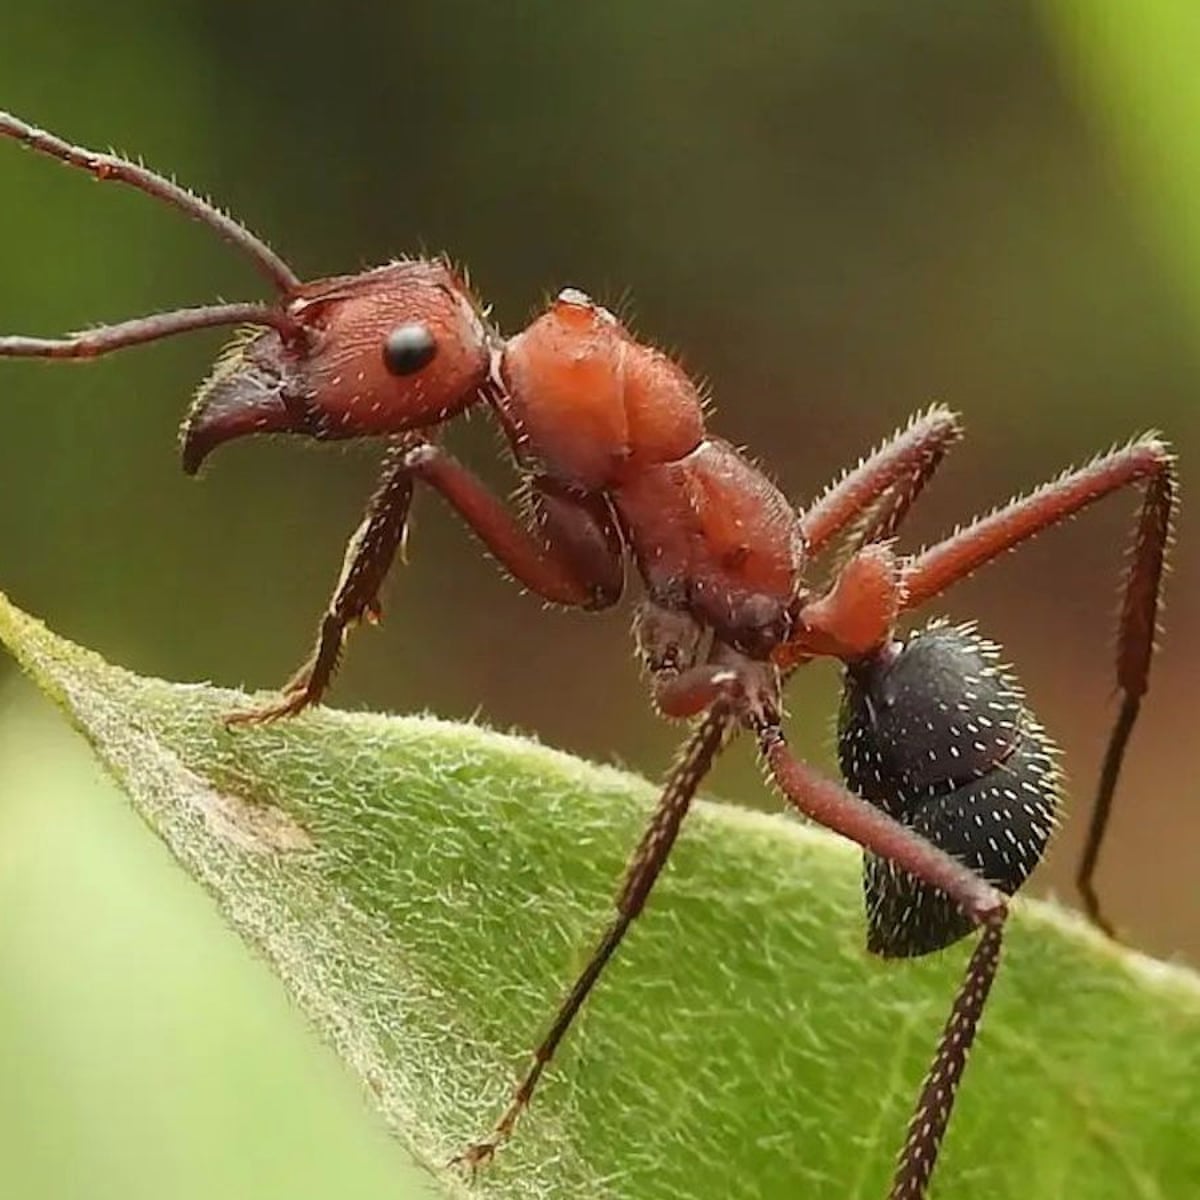 Ants can be better than pesticides for growing healthy crops, study finds |  Environment | The Guardian